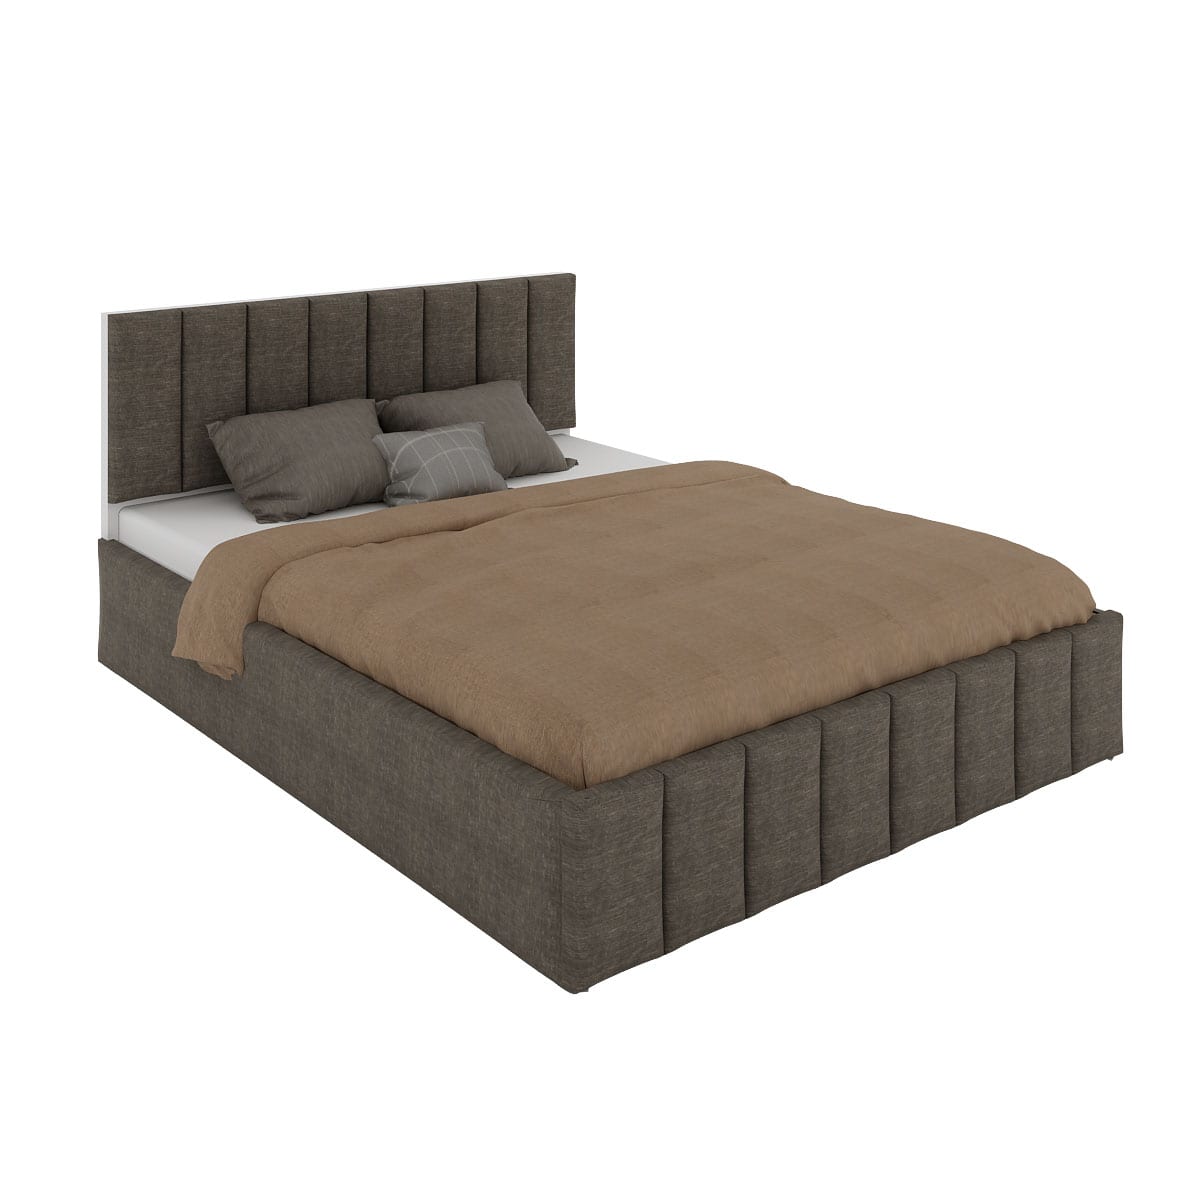 Queen Size Double Bed with Hydraulic Storage – Trendy Line